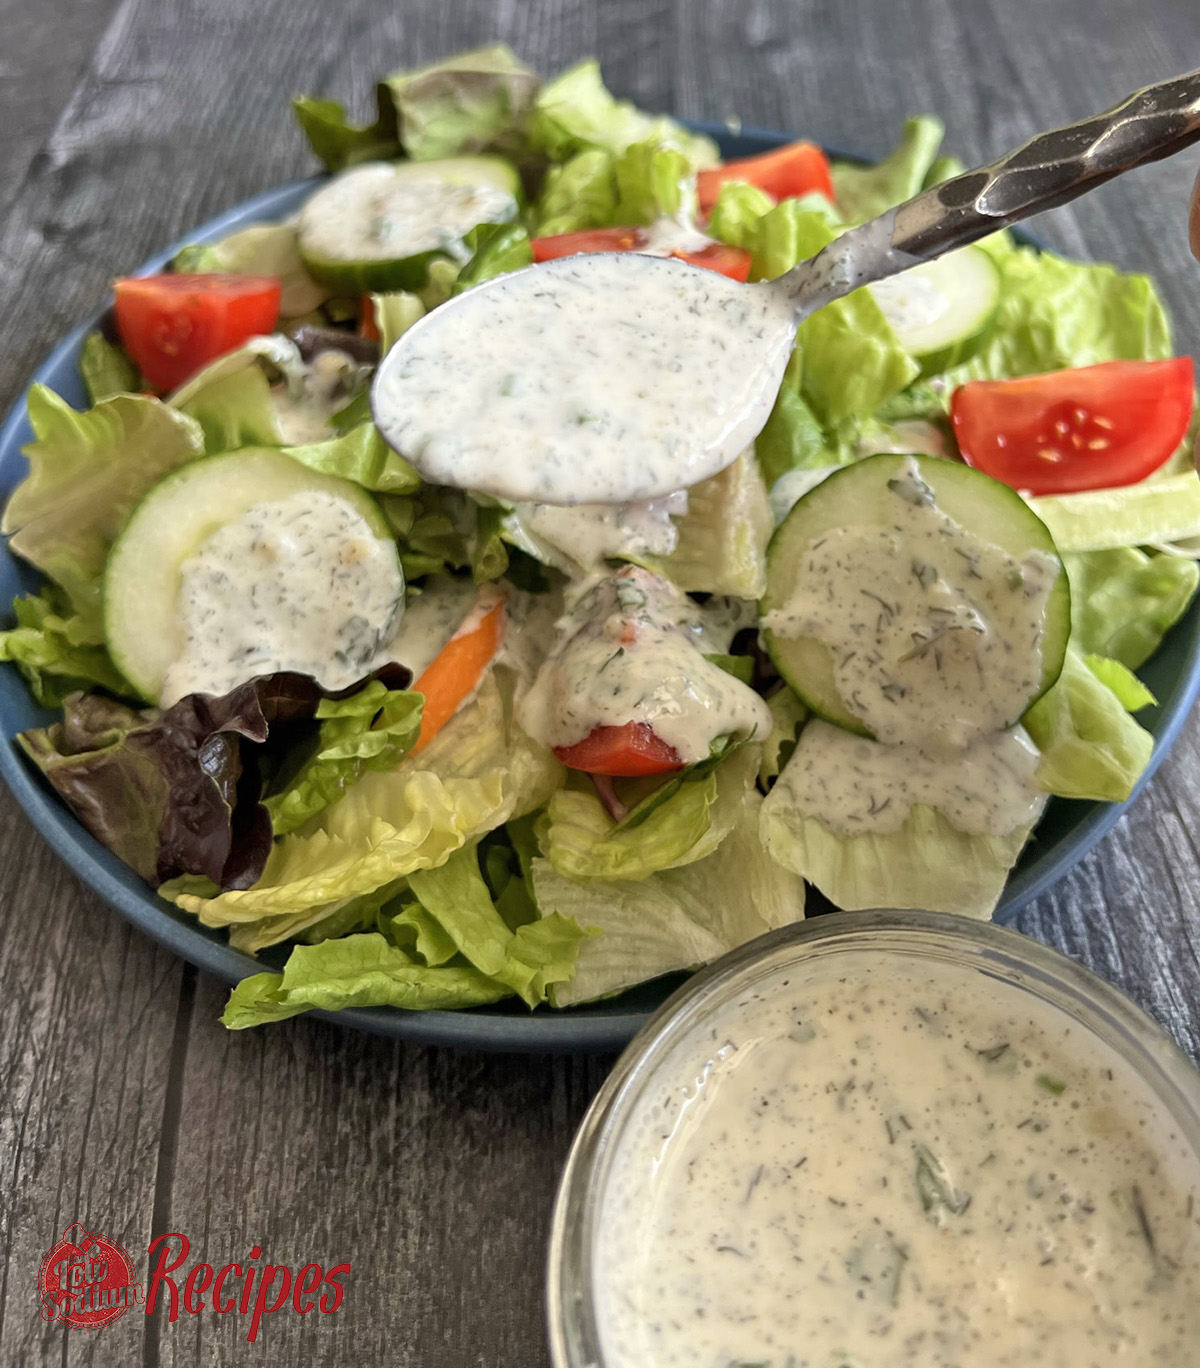 Recipe for low sodium ranch dressing